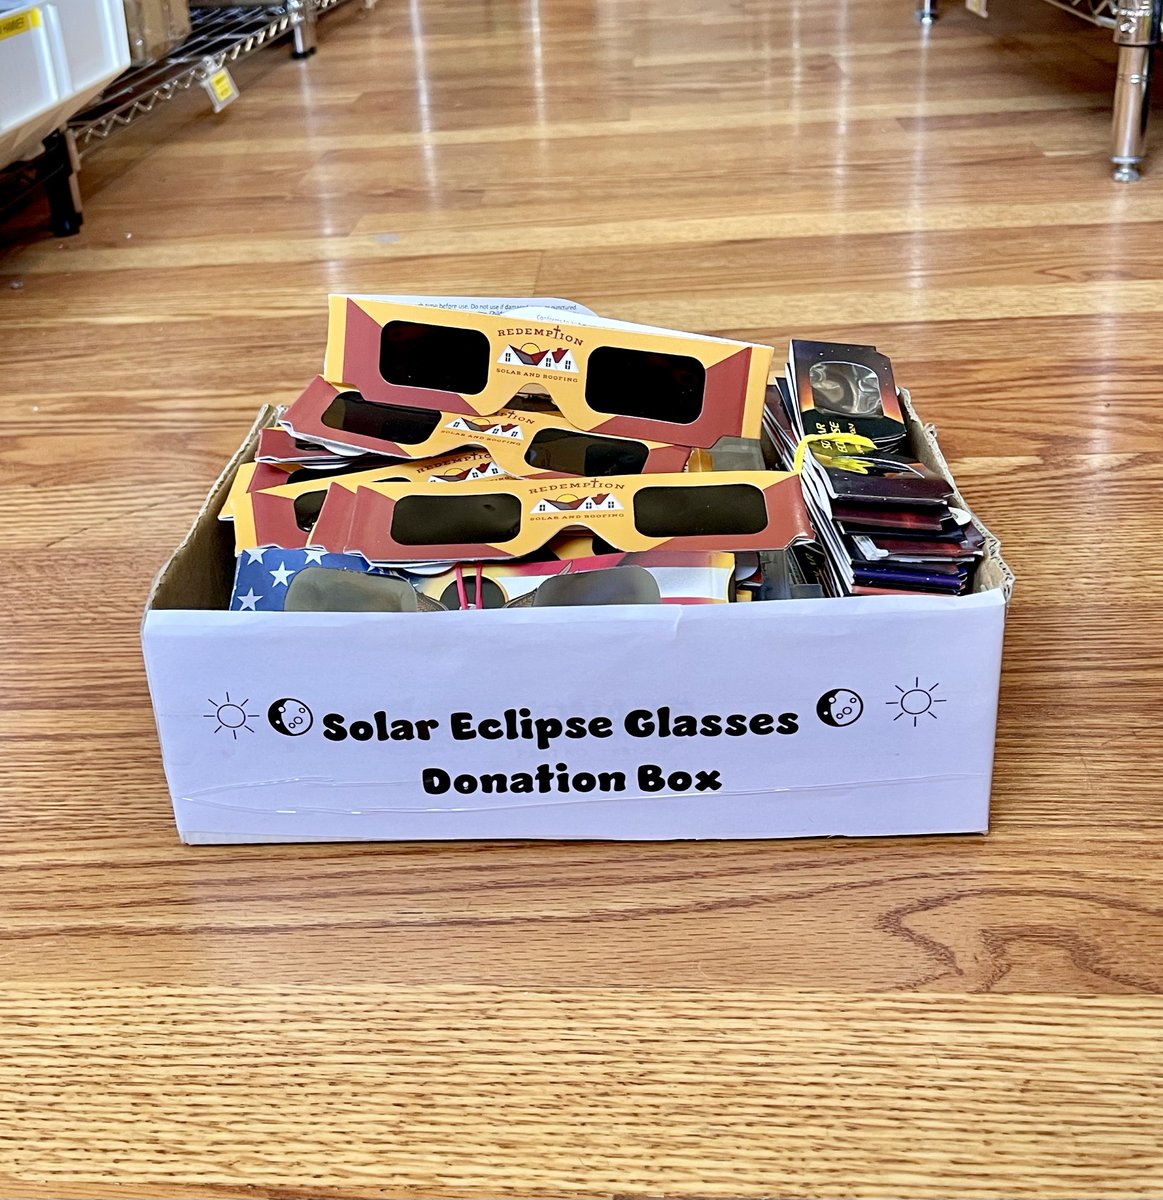 We're Eclipsing Expectations 🤩
We're floored by the generosity of our community; we've already collected 49 pairs of solar eclipse glasses for donation! 🕶️🎉 

#DestinySolutions #eclipseglasses #SolarEclipse  #solareclipse2024 #solareclipseglasses #donation  #GiveBack